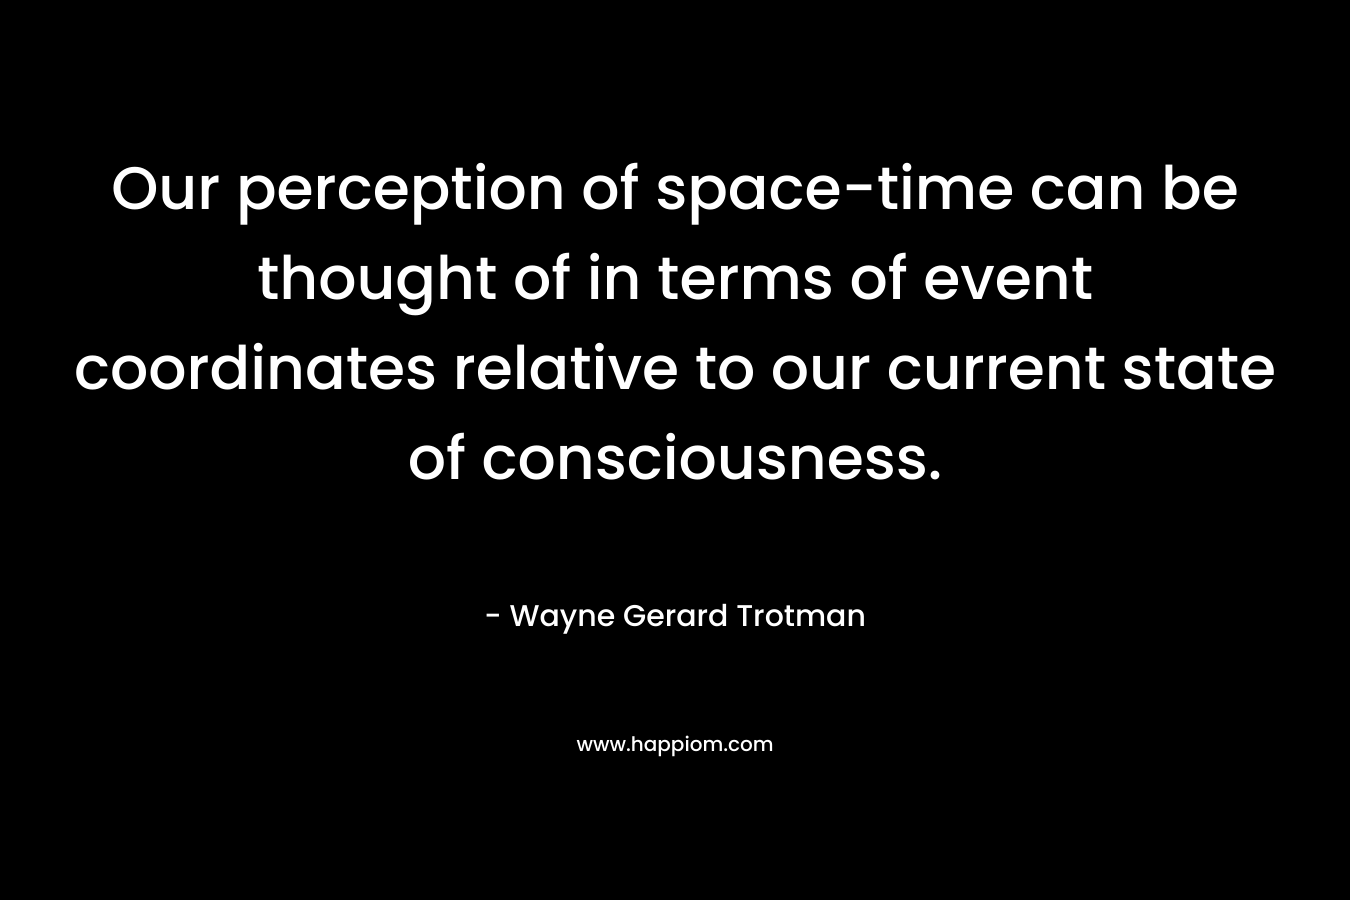 Our perception of space-time can be thought of in terms of event coordinates relative to our current state of consciousness. – Wayne Gerard Trotman